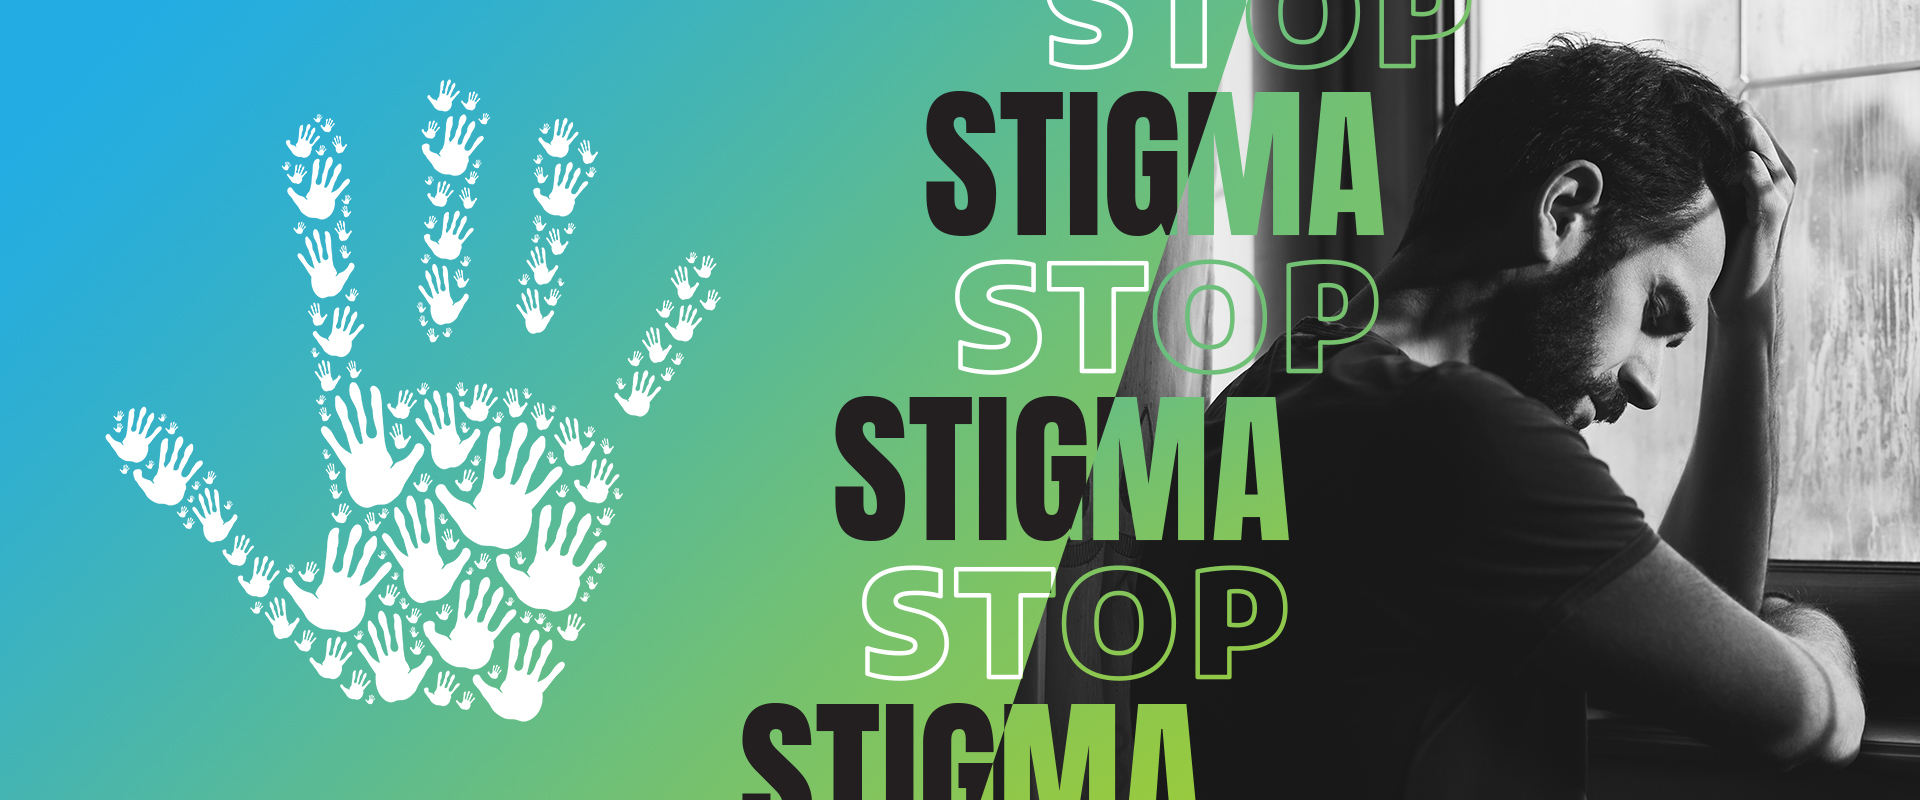 whats-new-hcps-bmp-stop-stigma-image-1